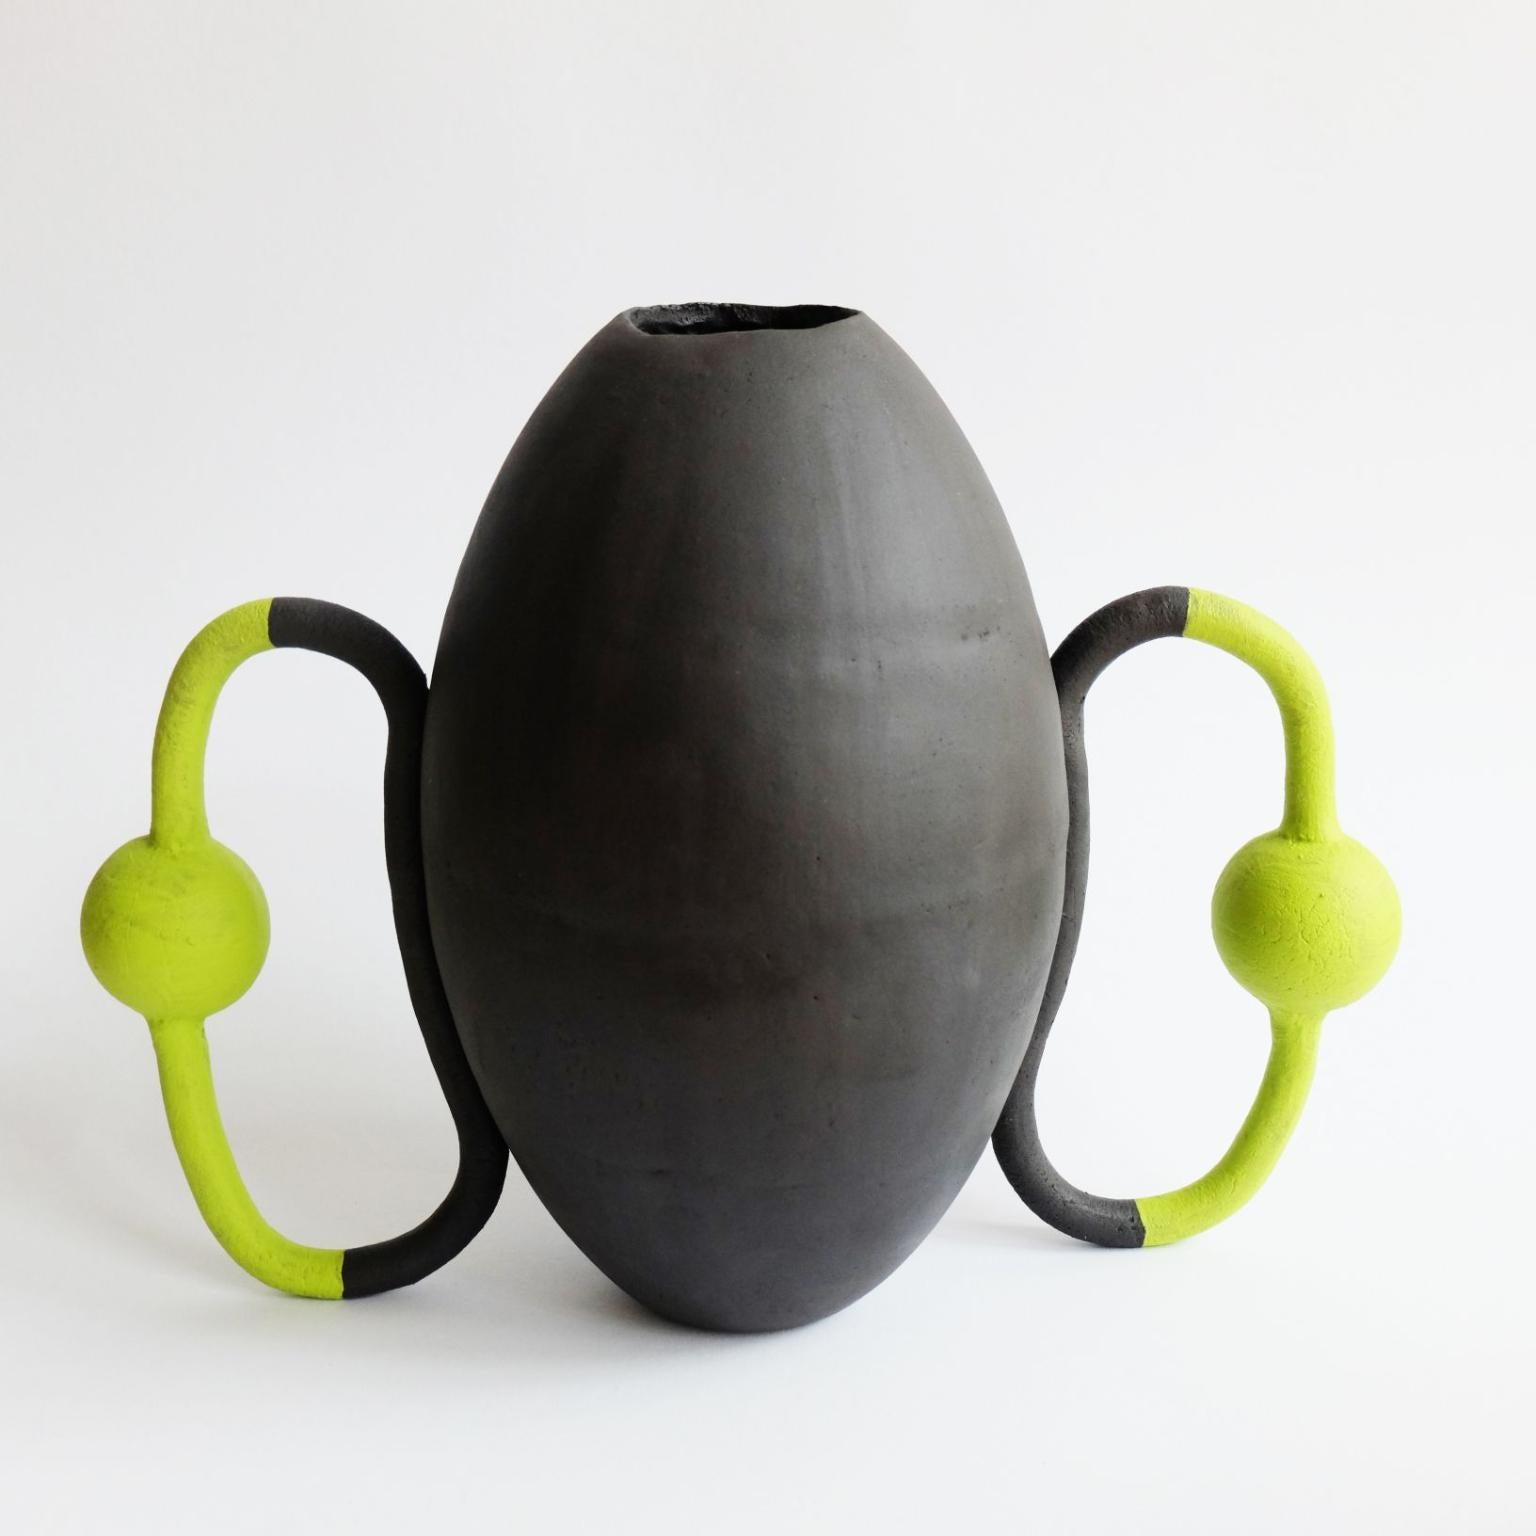 Macropha vessel by Ia Kutateladze
Dimensions: W 37 x H 28 cm
Materials: Raw Black Clay

“Playground For Salvation” was created entirely during quarantine, in my Berlin studio. The stillness of the lockdown enabled me to experiment and challenge